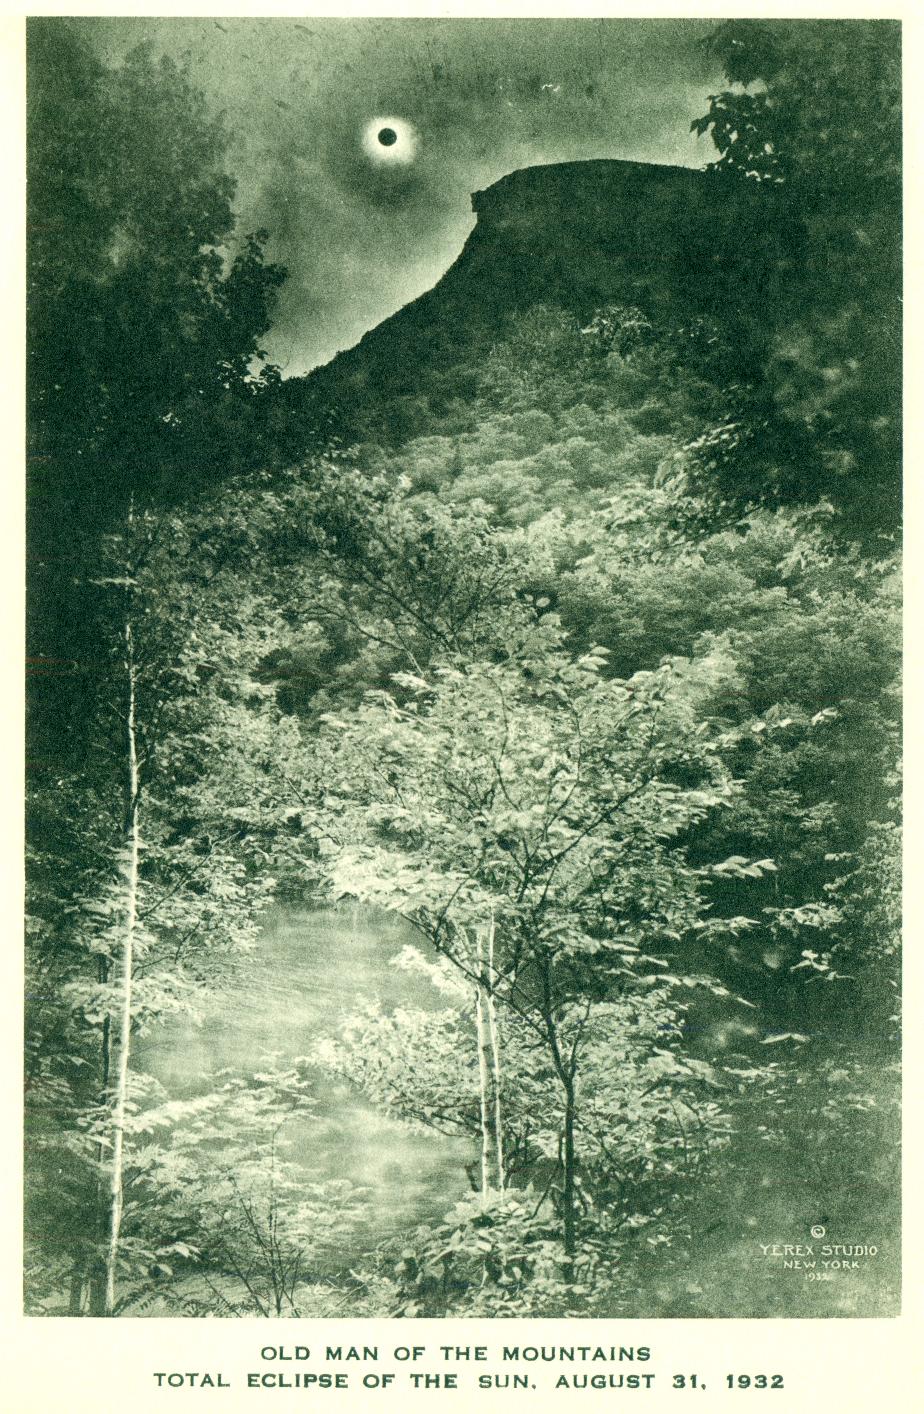 Old Man of the Mountains, Solar Eclipse August 31 1932